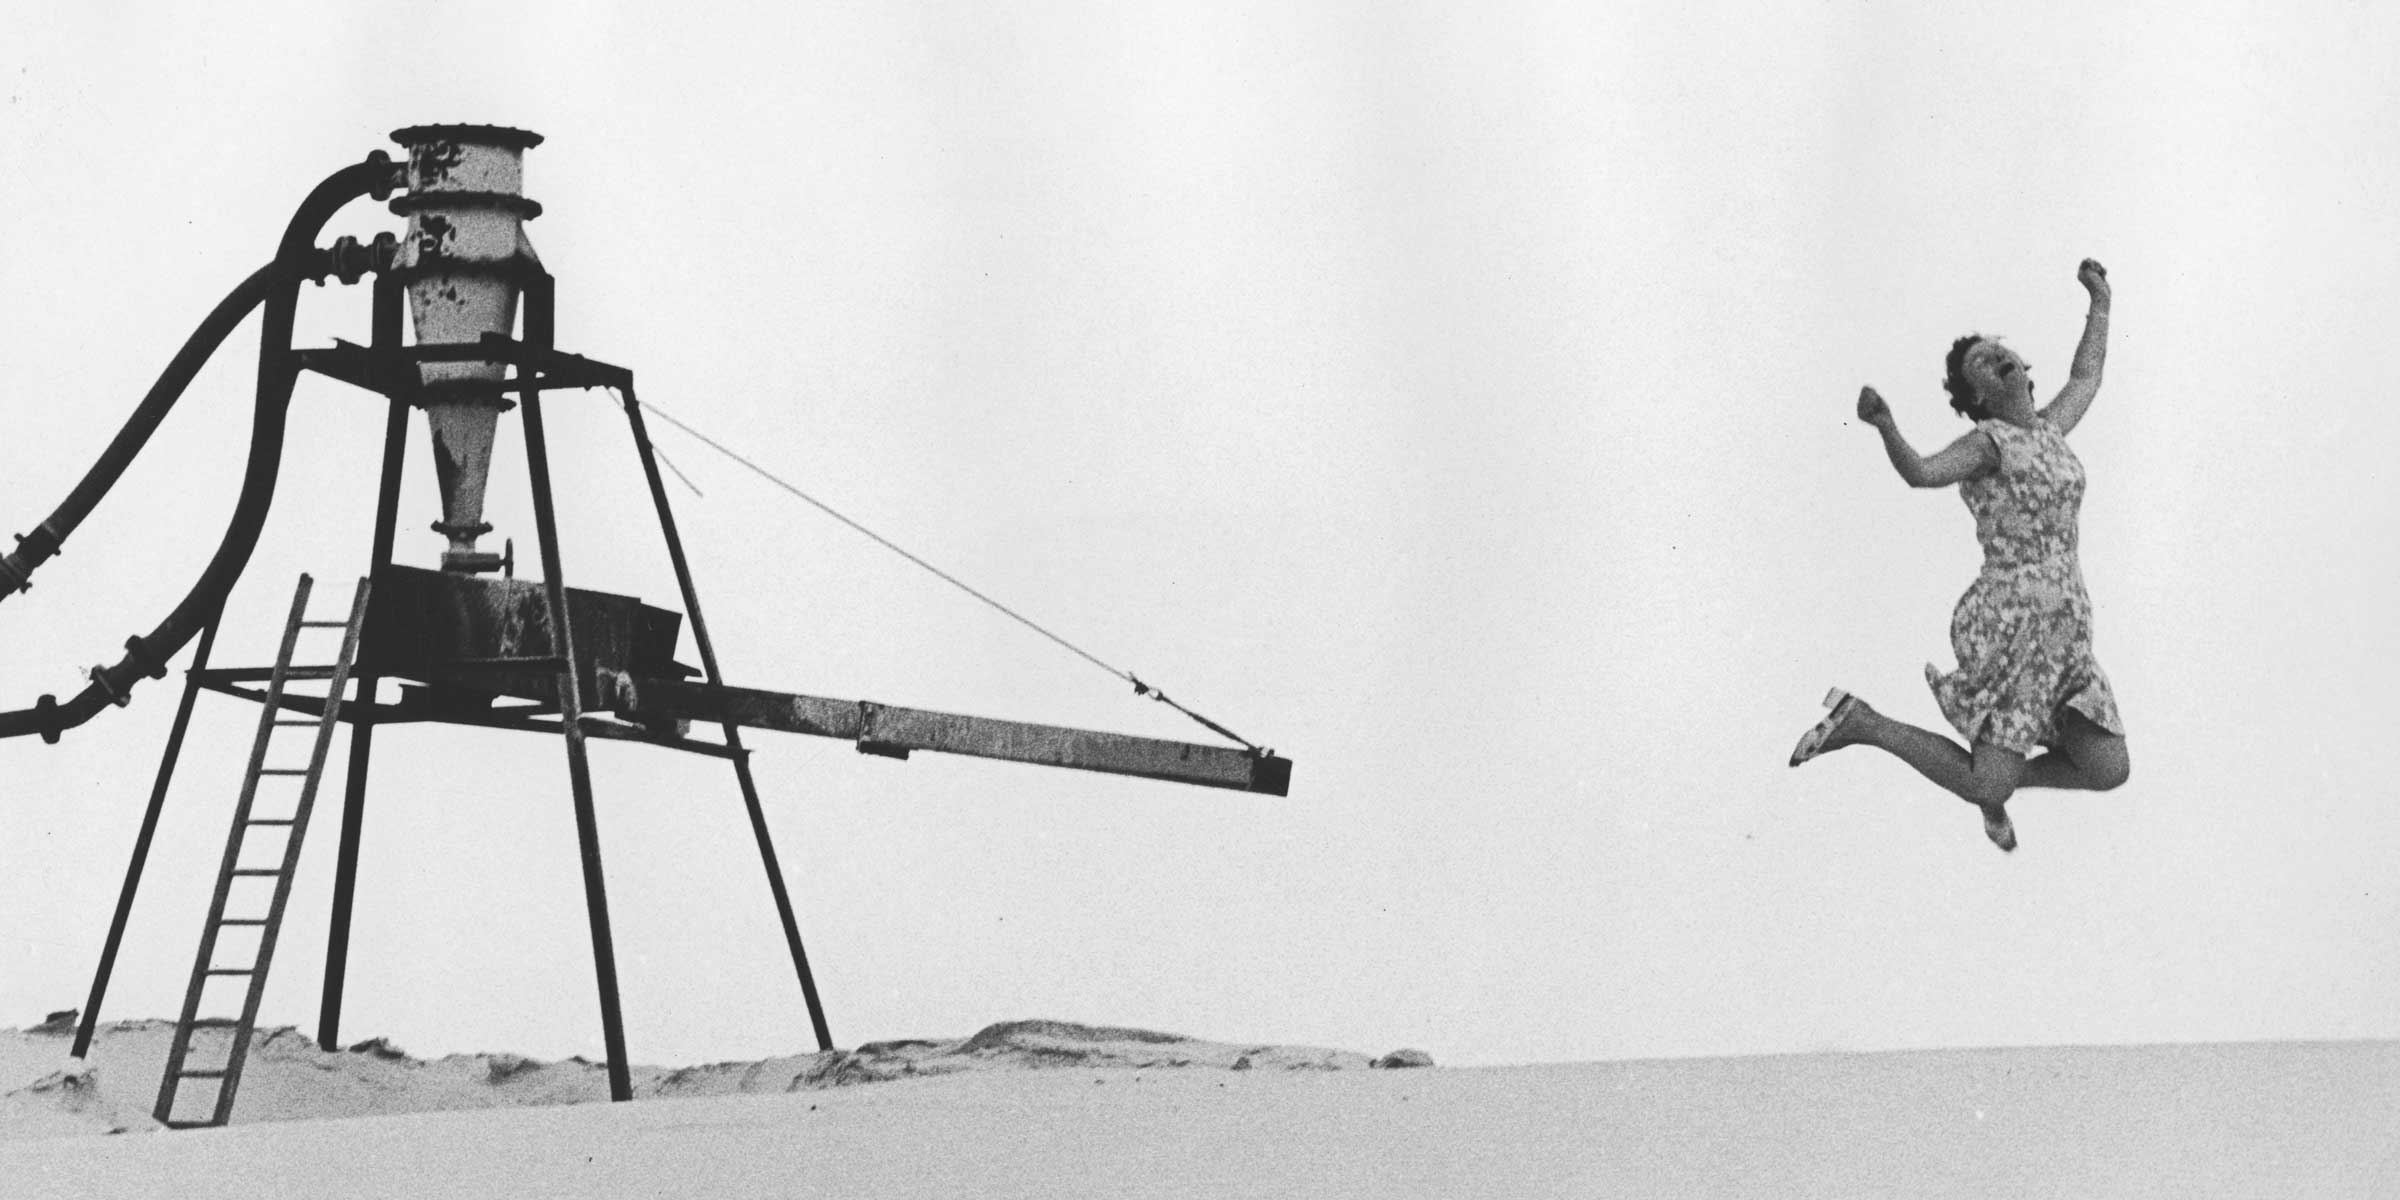 Black and white photograph of a woman jumping on a beach with industrial equipment in the background.